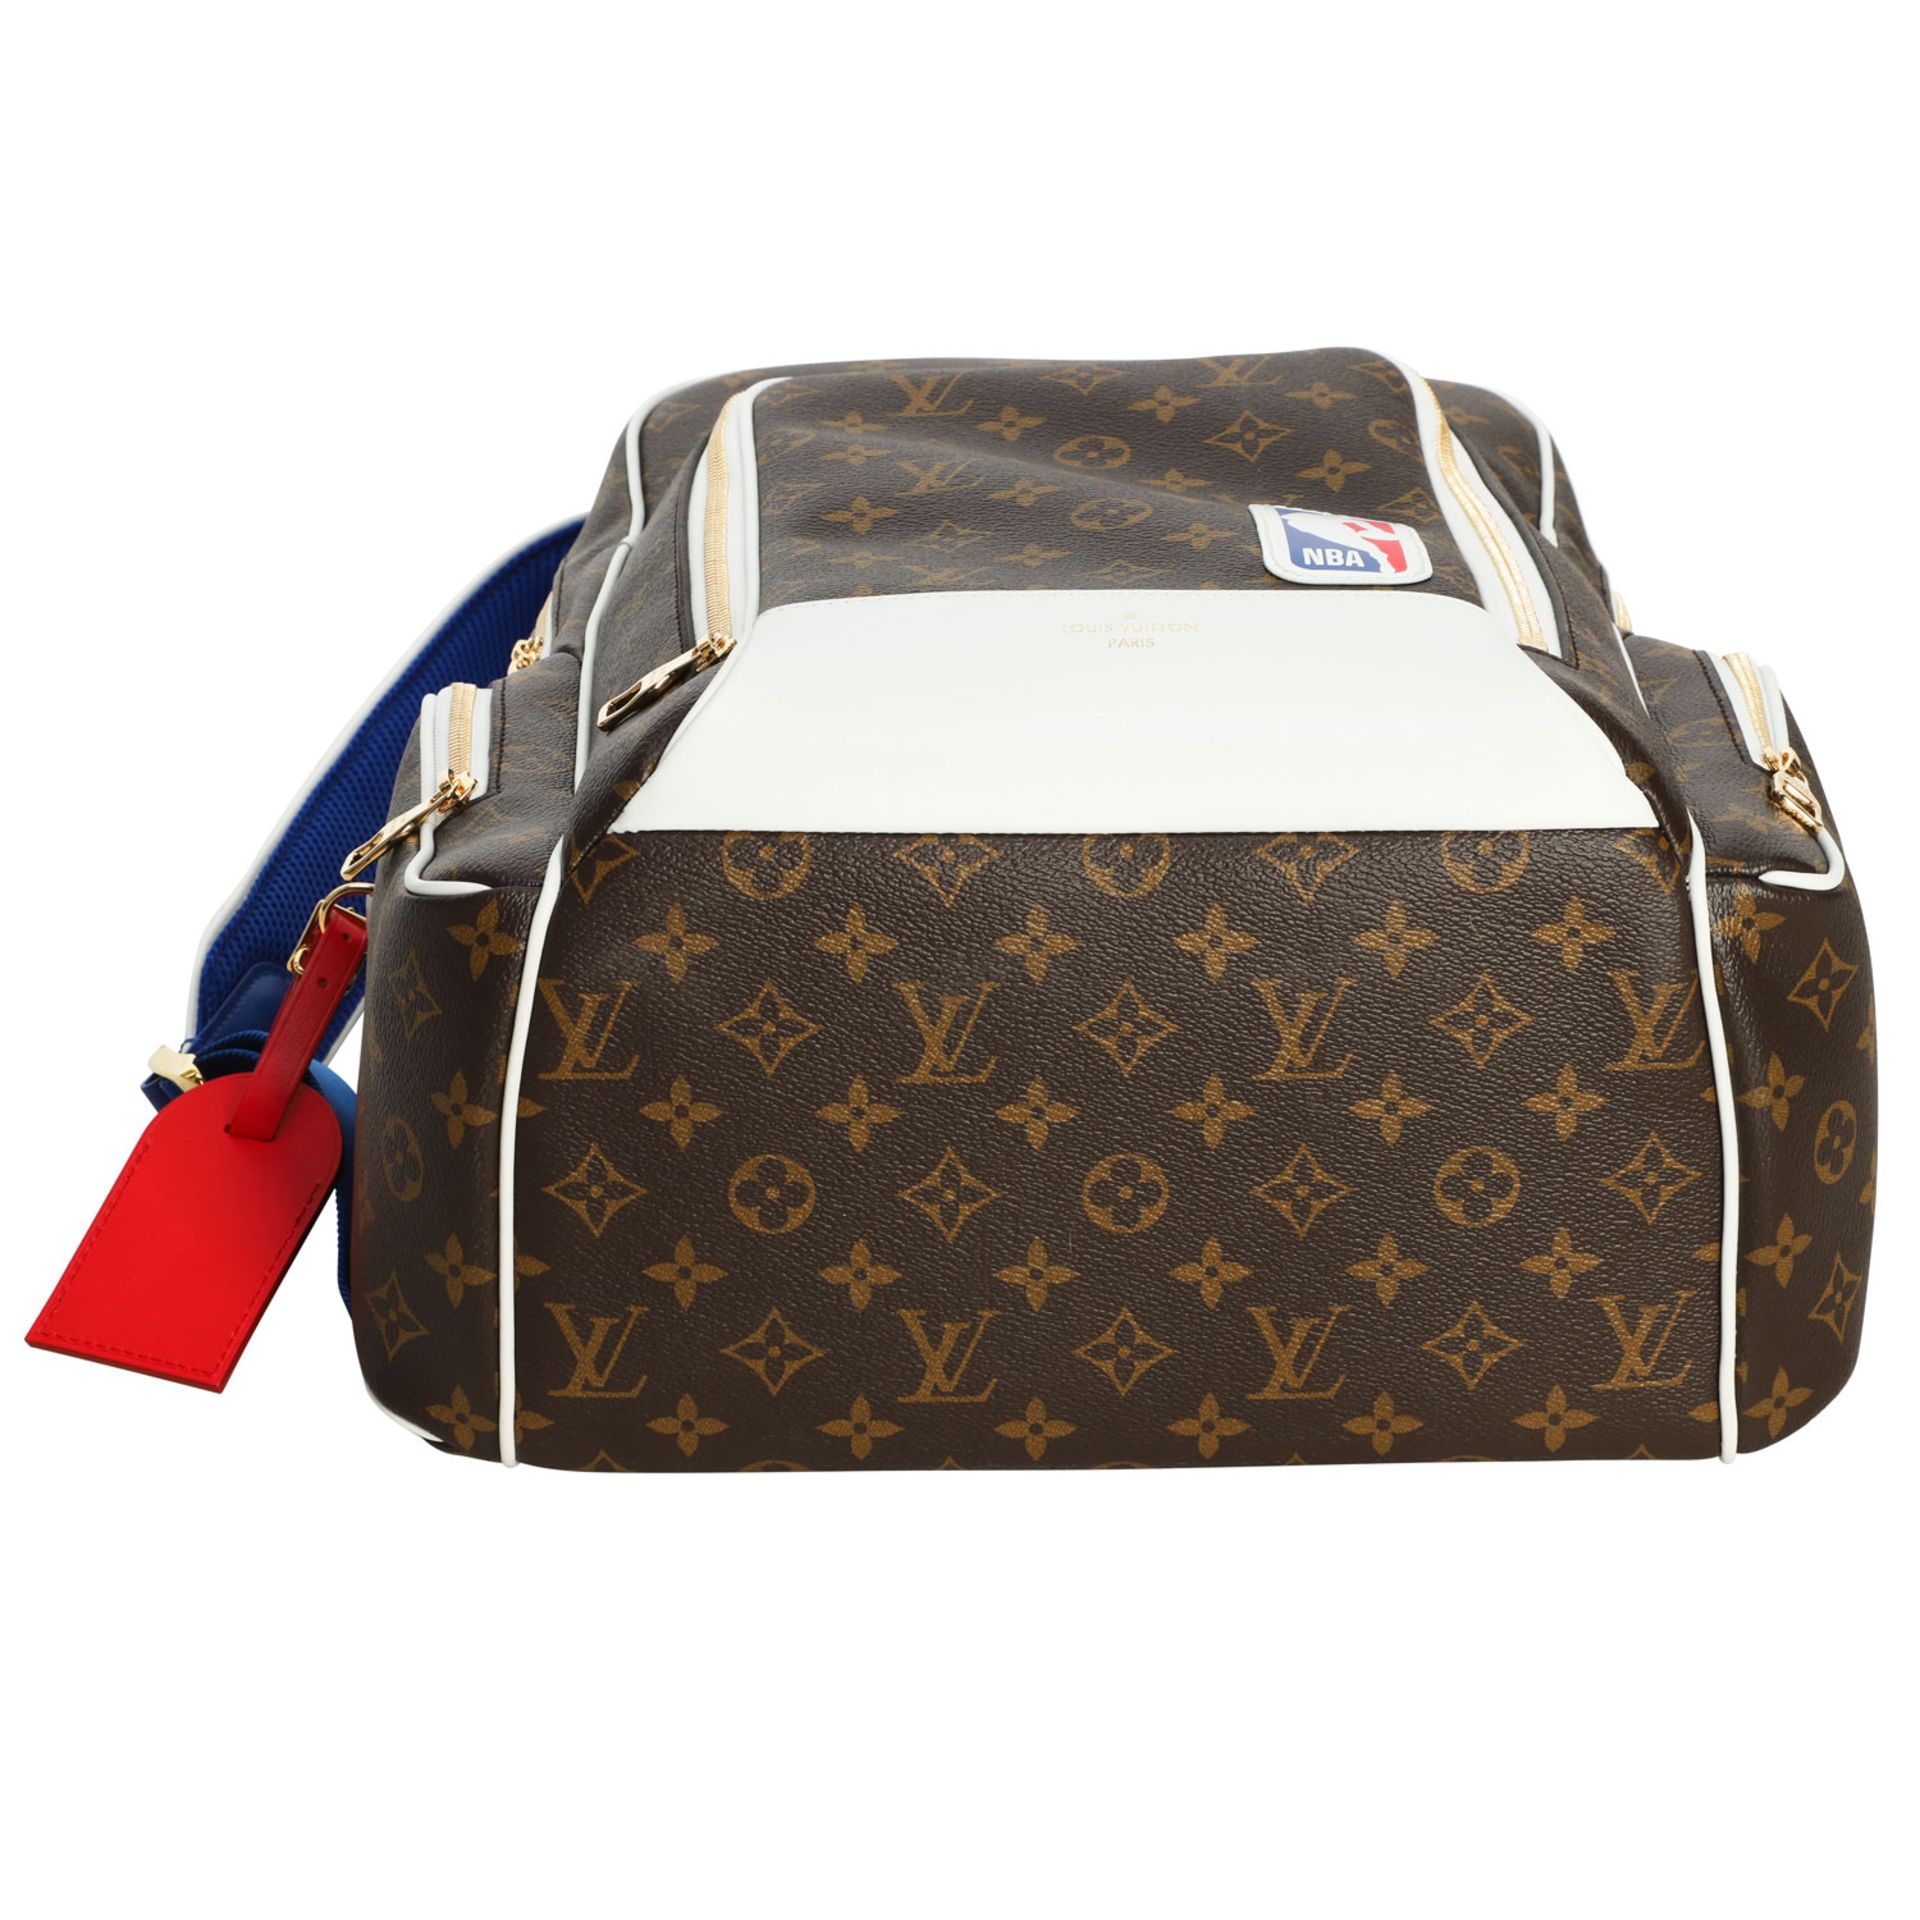 LOUIS VUITTON x NBA Rucksack "NEW BACKPACK". - Image 7 of 8